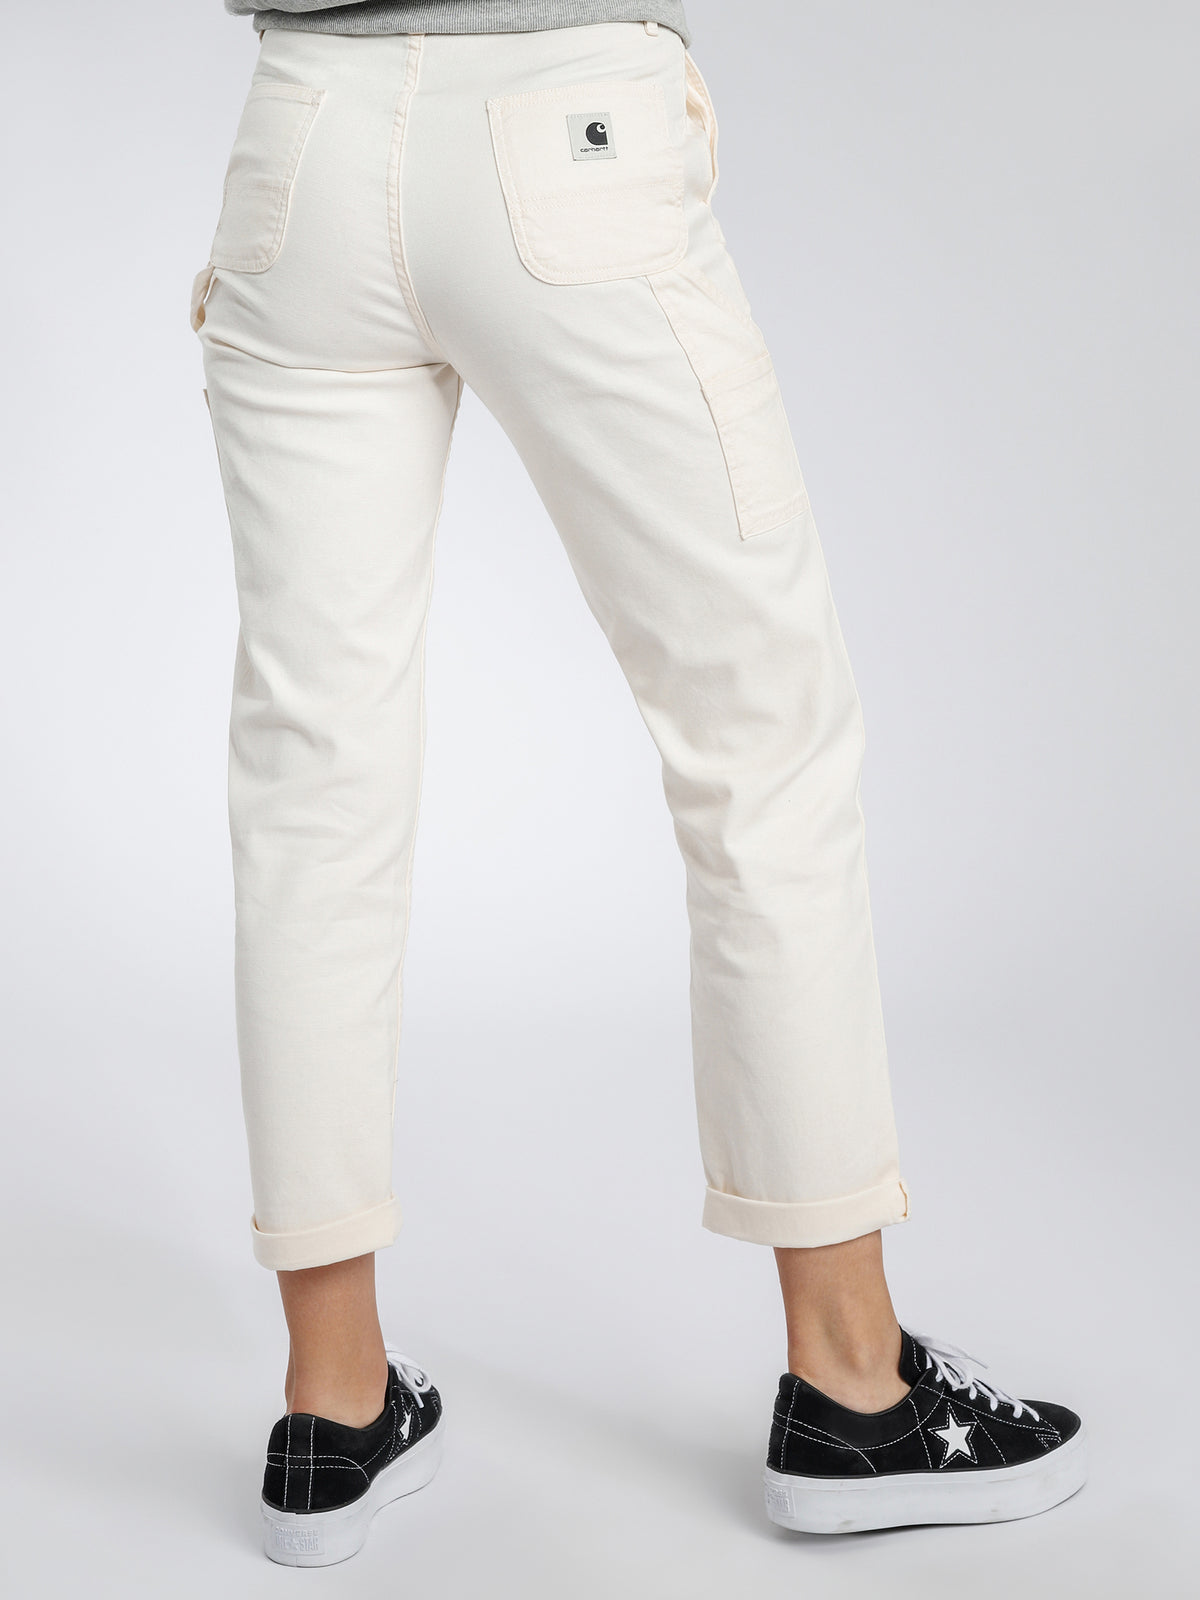 Pierce Pants in Off-White Stretch Canvas